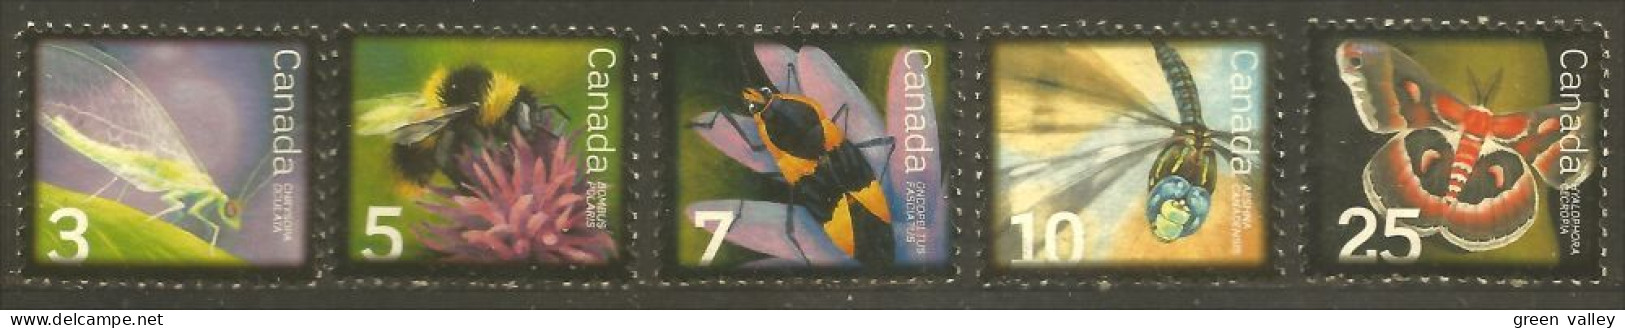 970 Canada Insectes Coccinelle Papillon Abeille Libellule Dragonfly Bee Biene Butterfly Sans Gomme (322) - Api